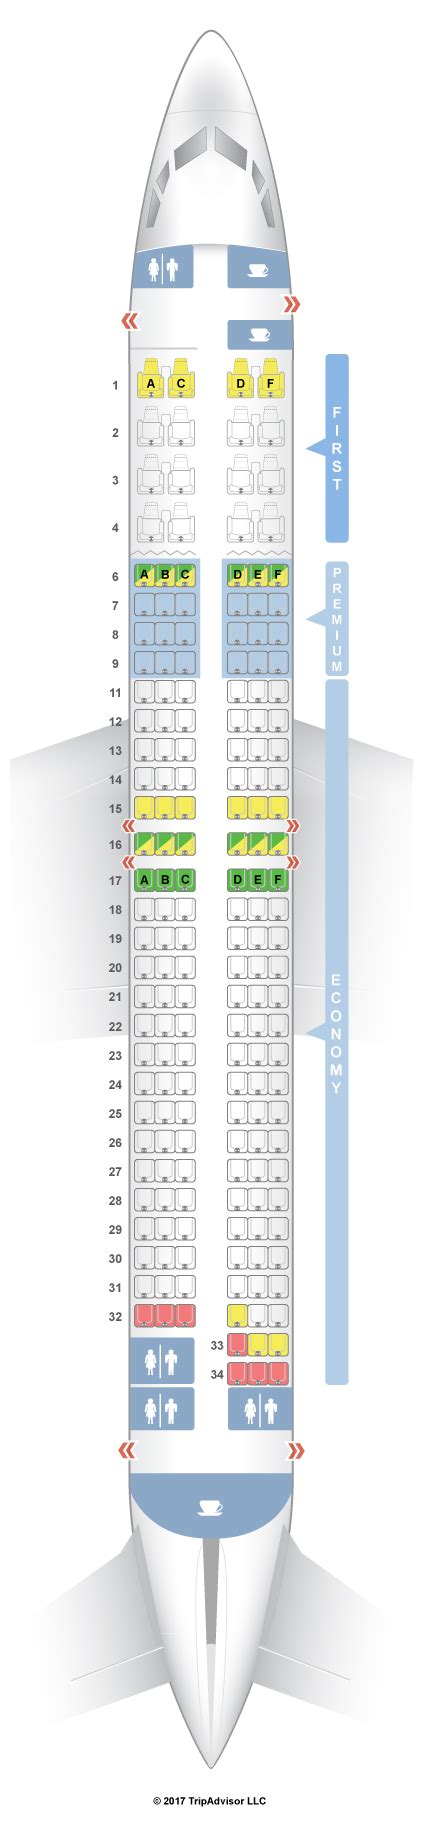 Alaska airlines seatguru 737 900. Things To Know About Alaska airlines seatguru 737 900. 